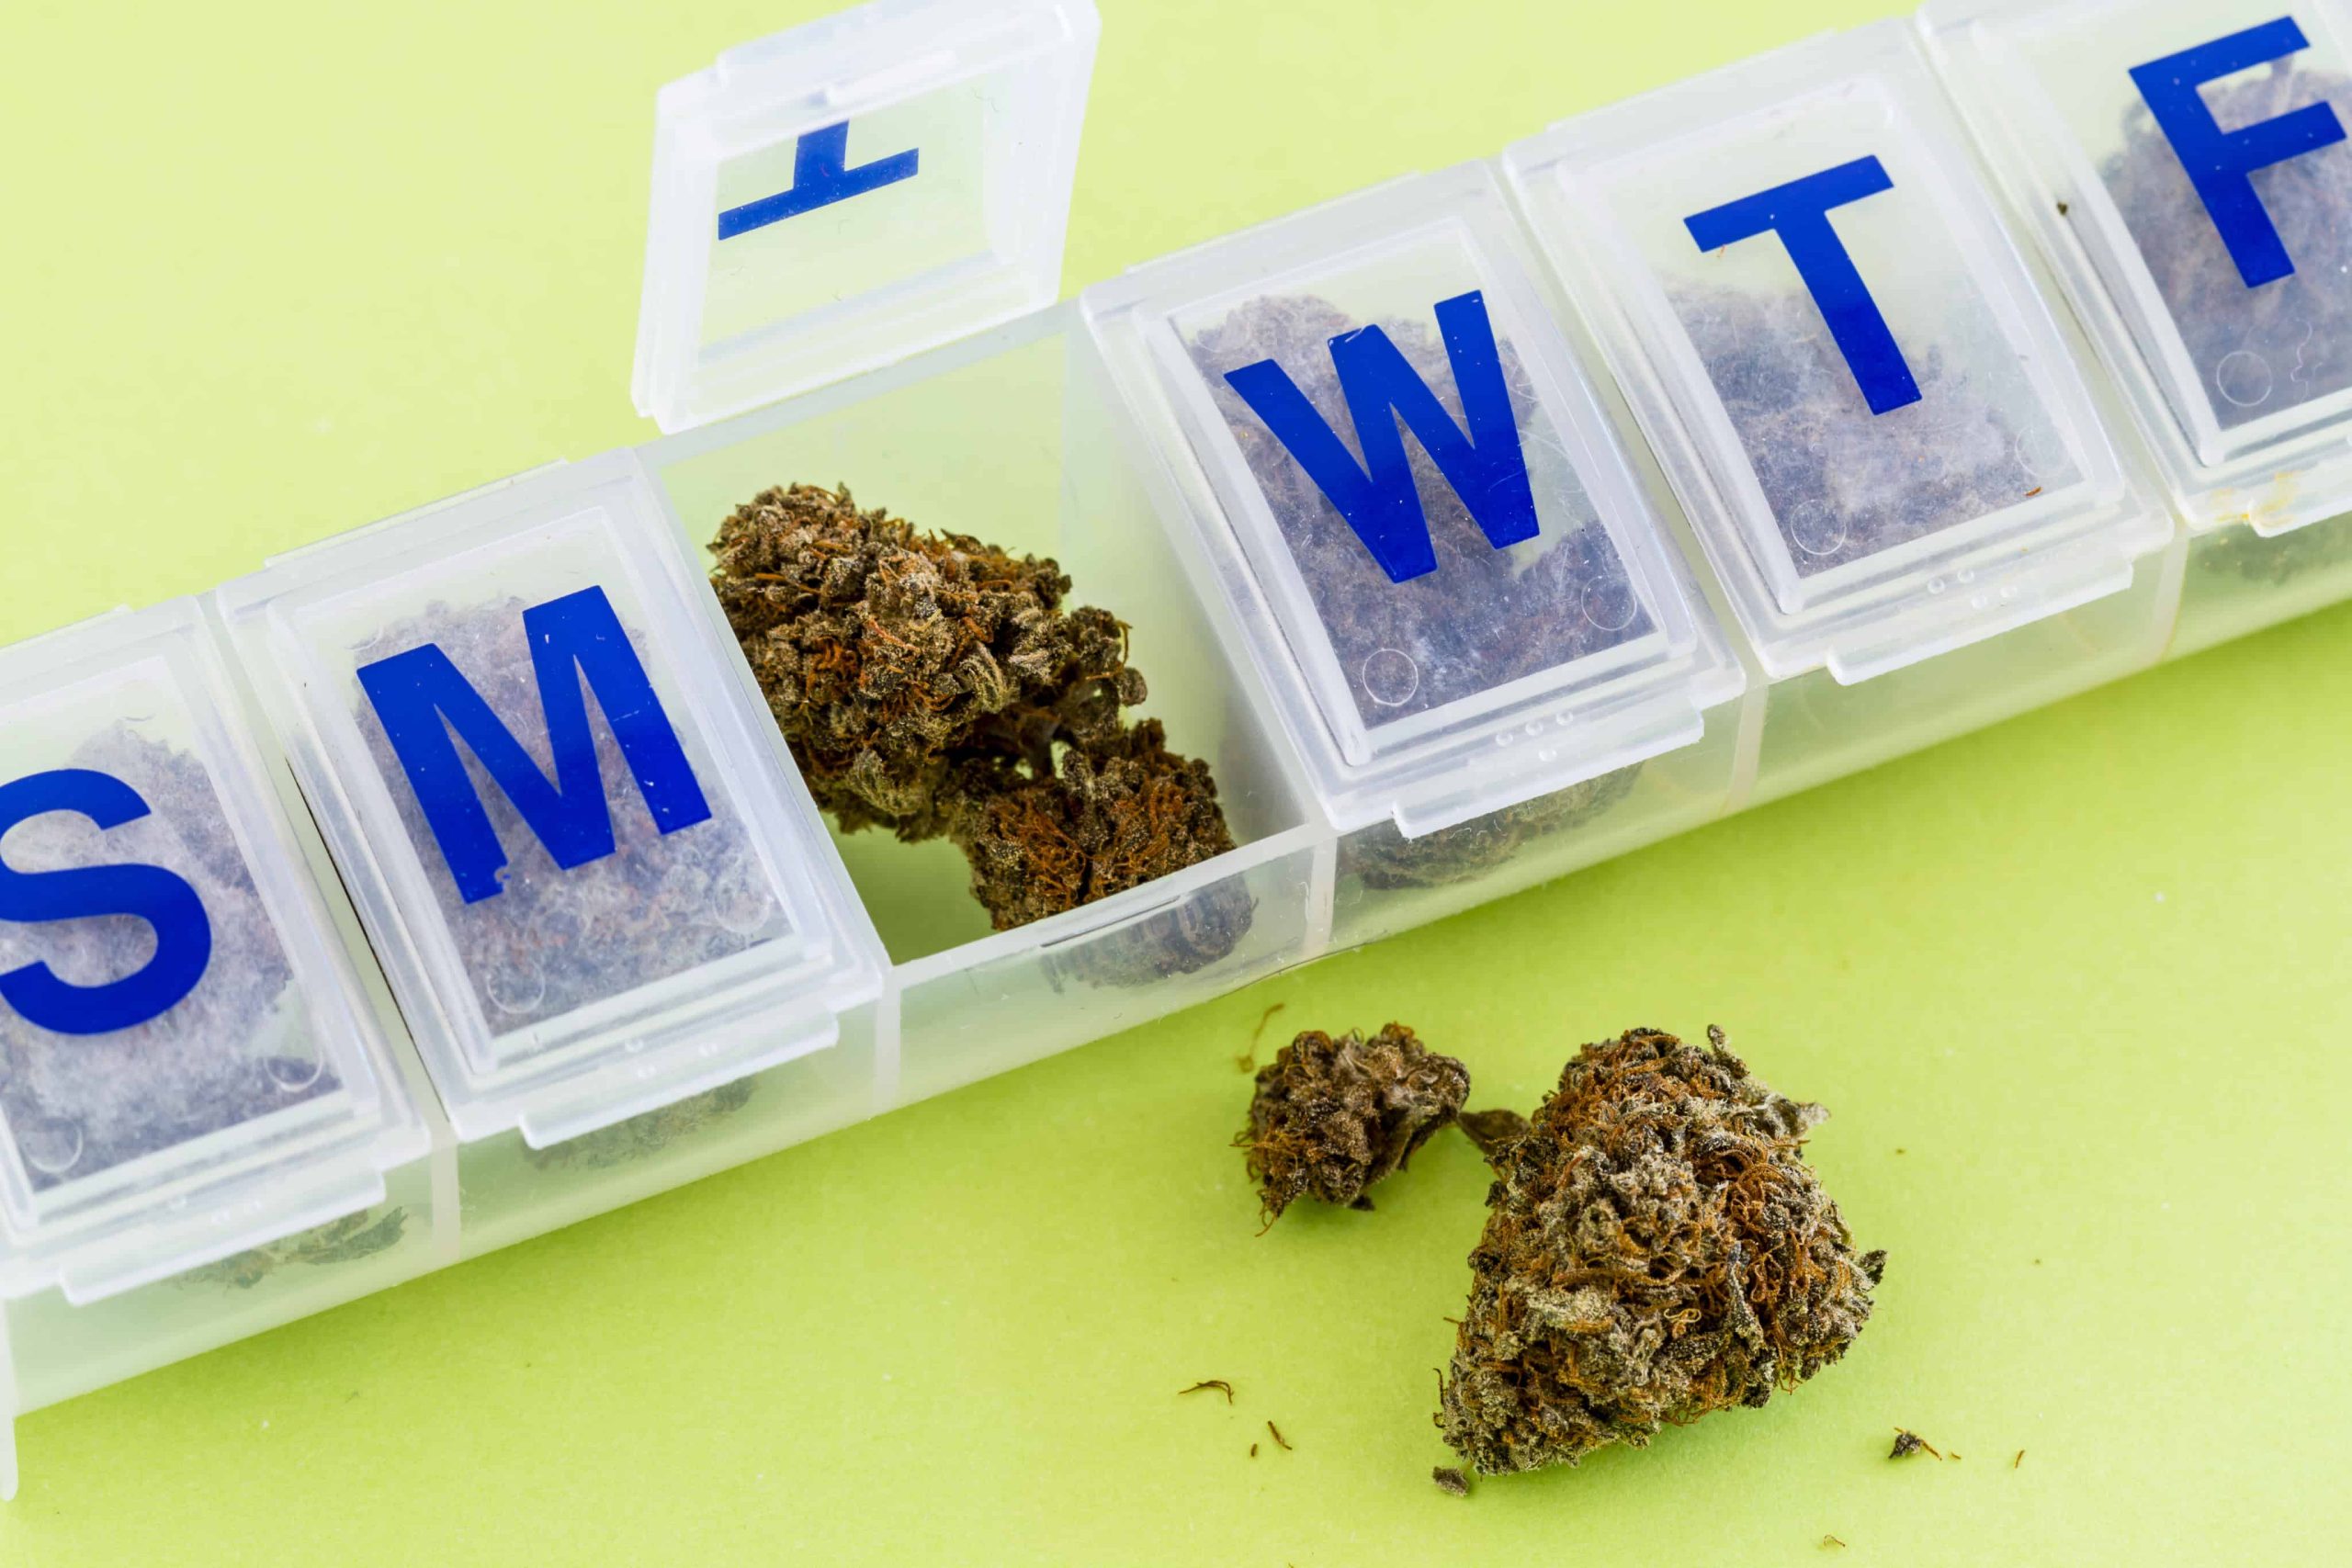 Minnesota Adds New Qualifying Conditions to Medical Cannabis Program